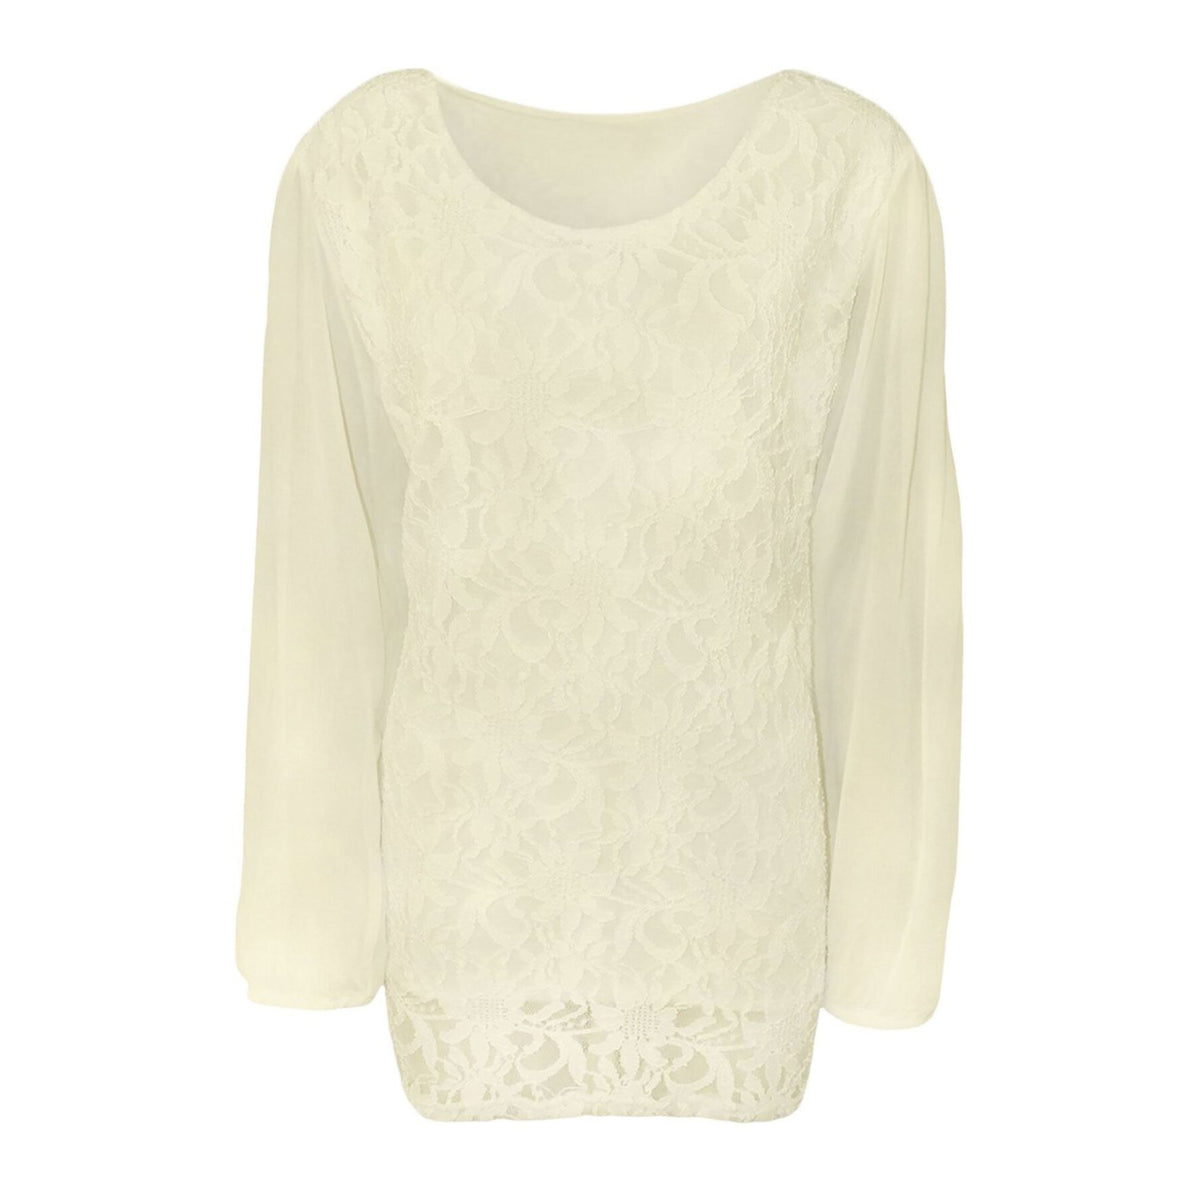 LACE BLOUSE WITH LONG CHIFFON SLEEVES